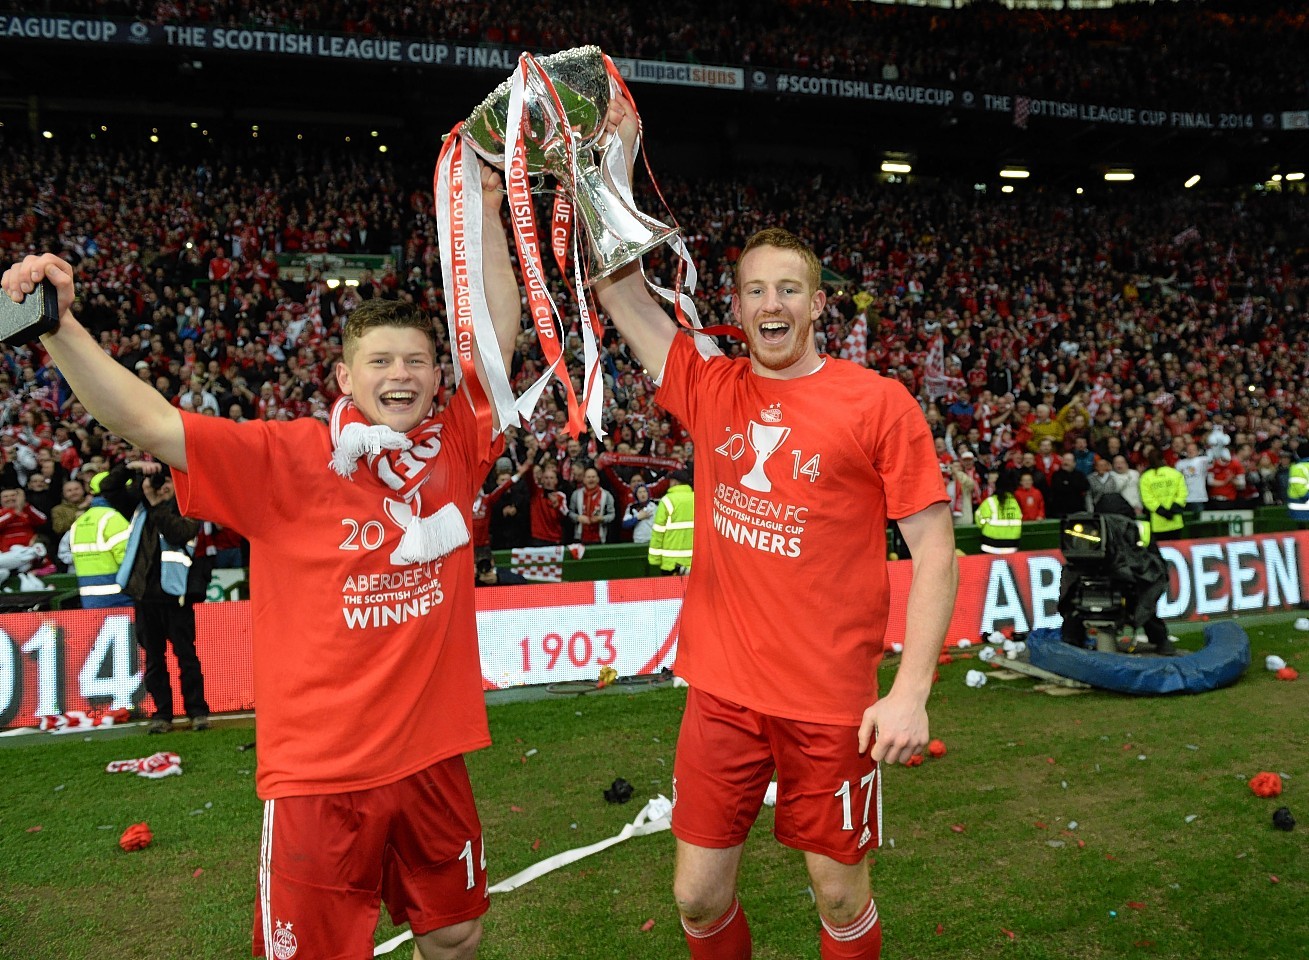 Rooney lifts the League Cup with Cammy Smith 